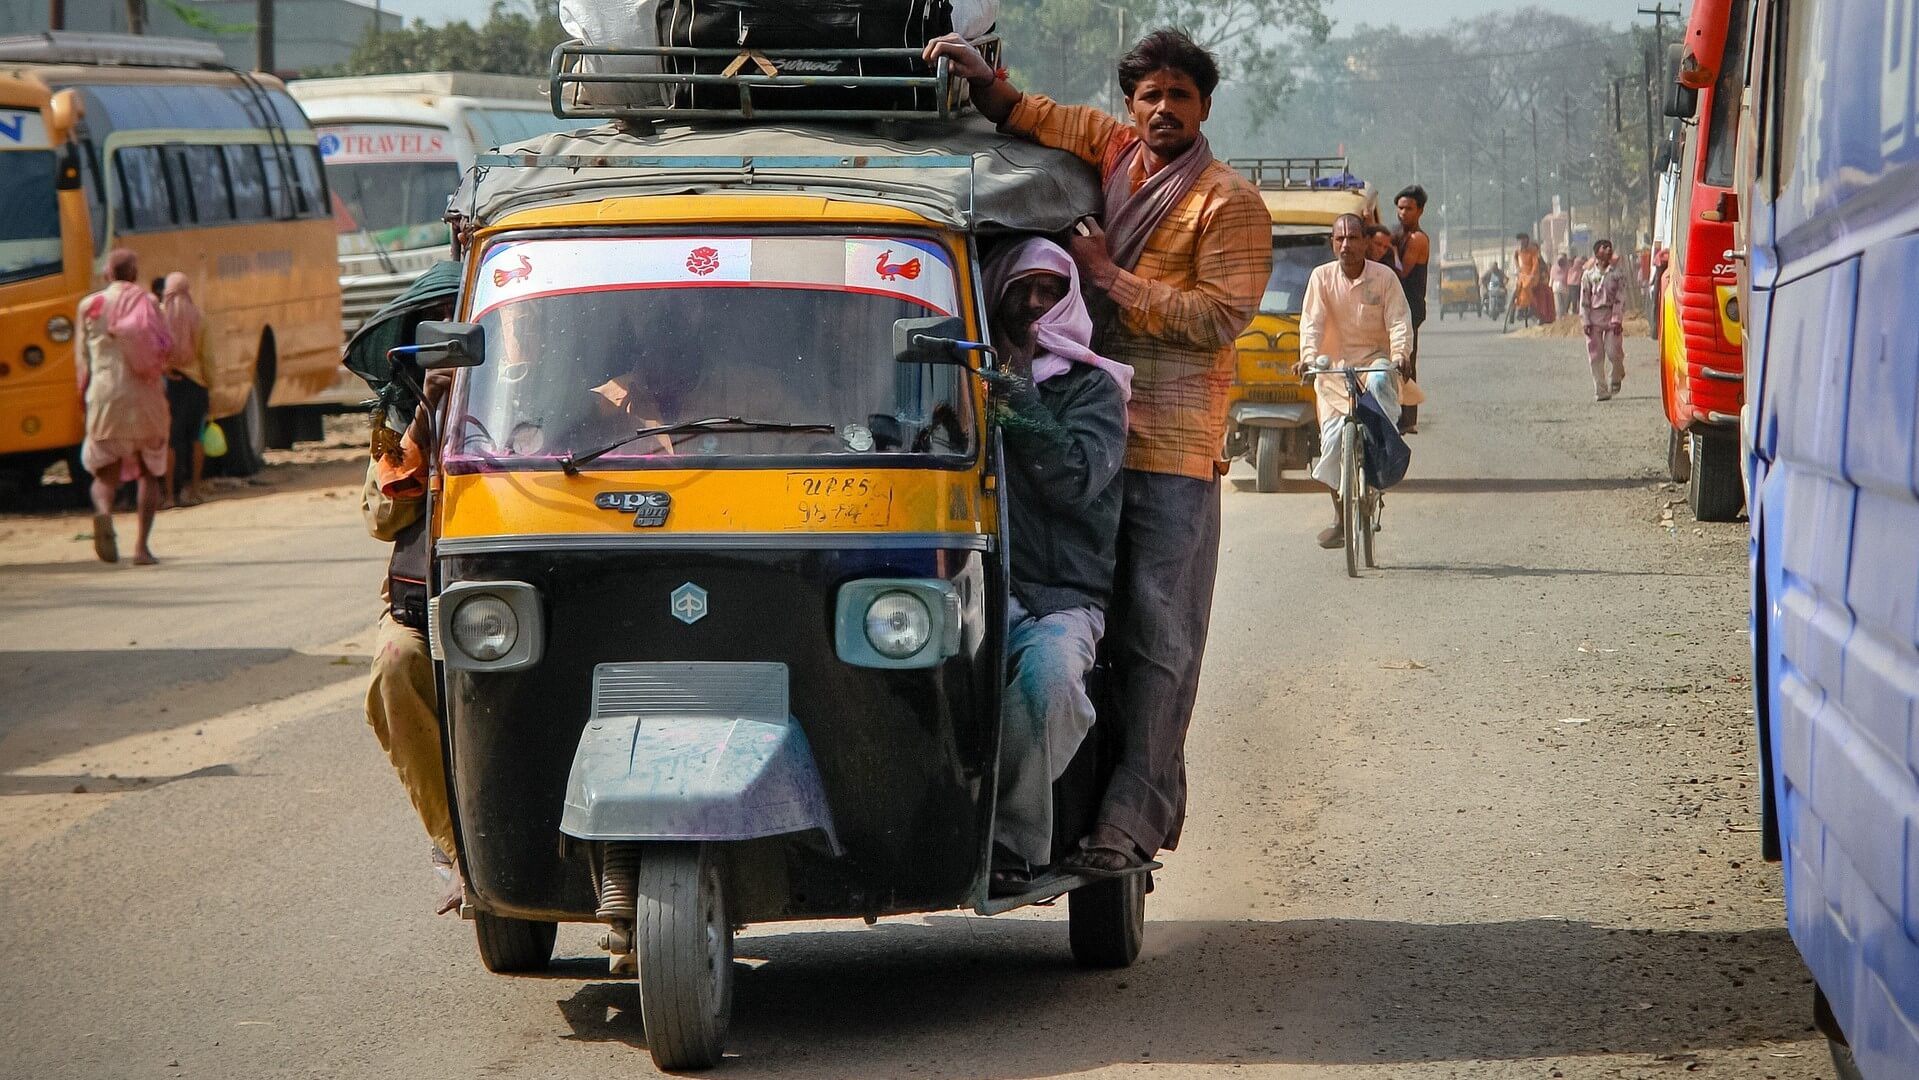 Three-wheel tuk tuk on Indian road, with passenger hanging on to the side